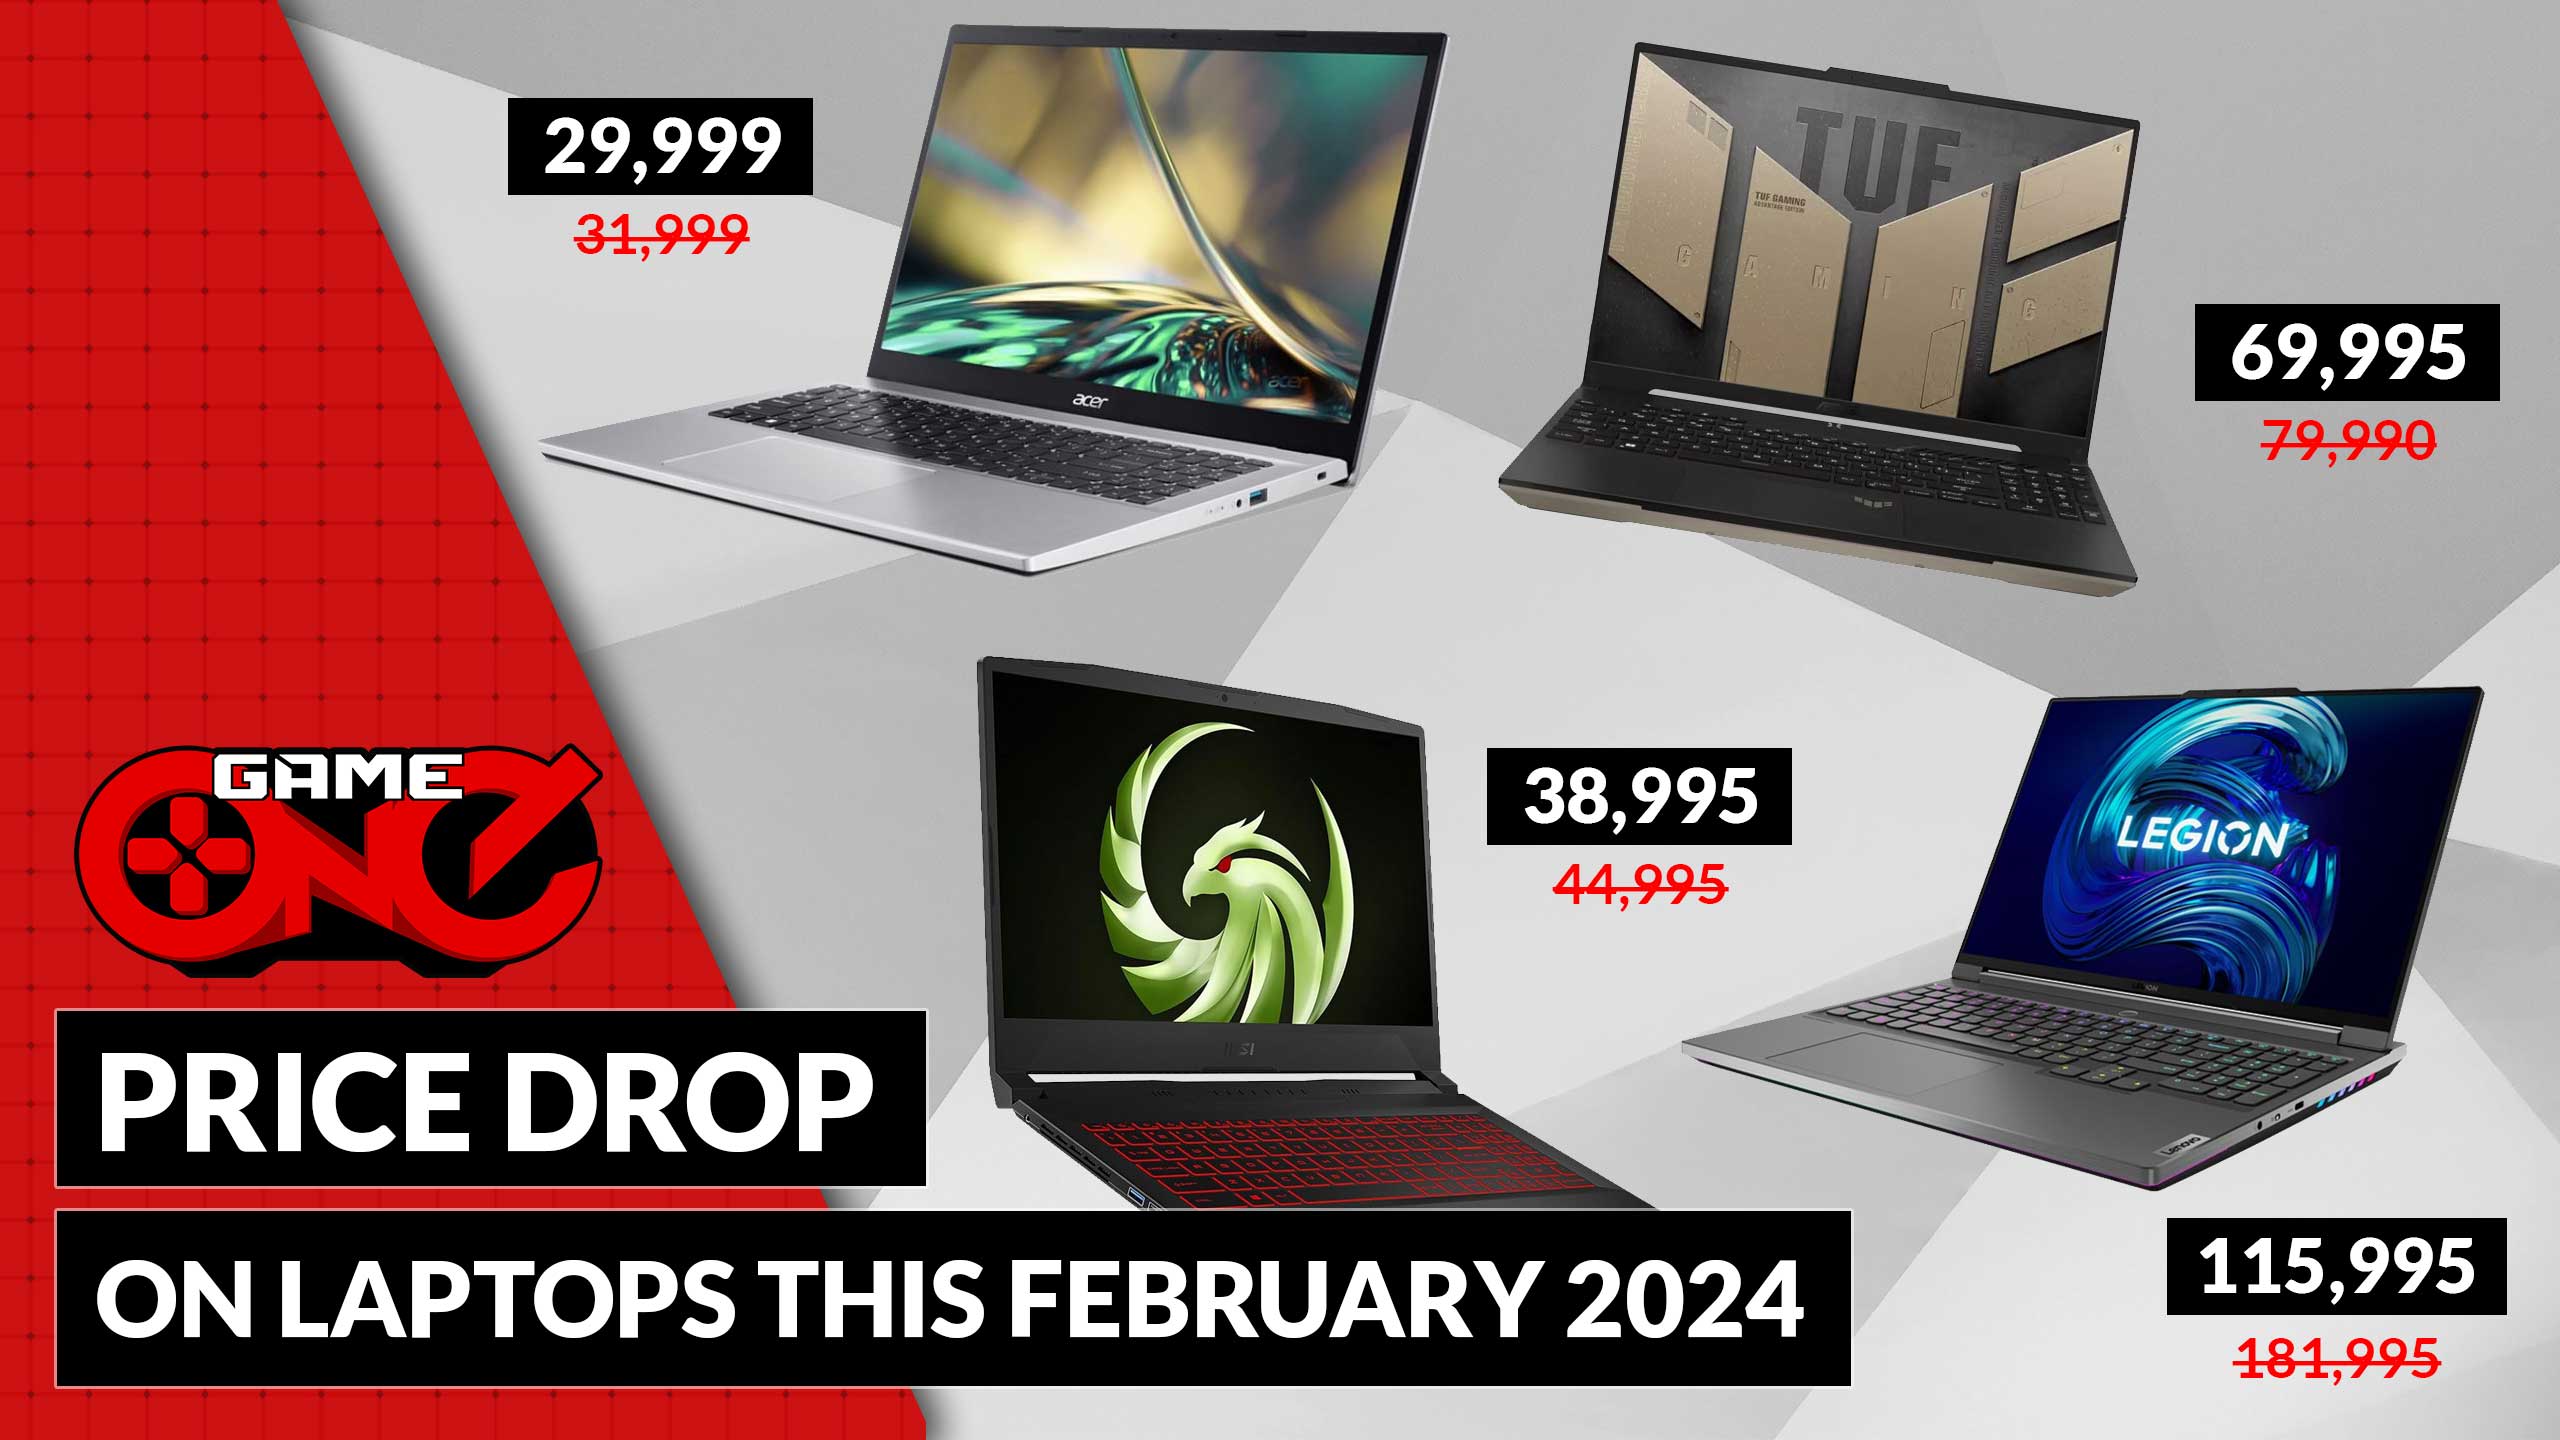 PRICE DROP on Laptops this February 2024!